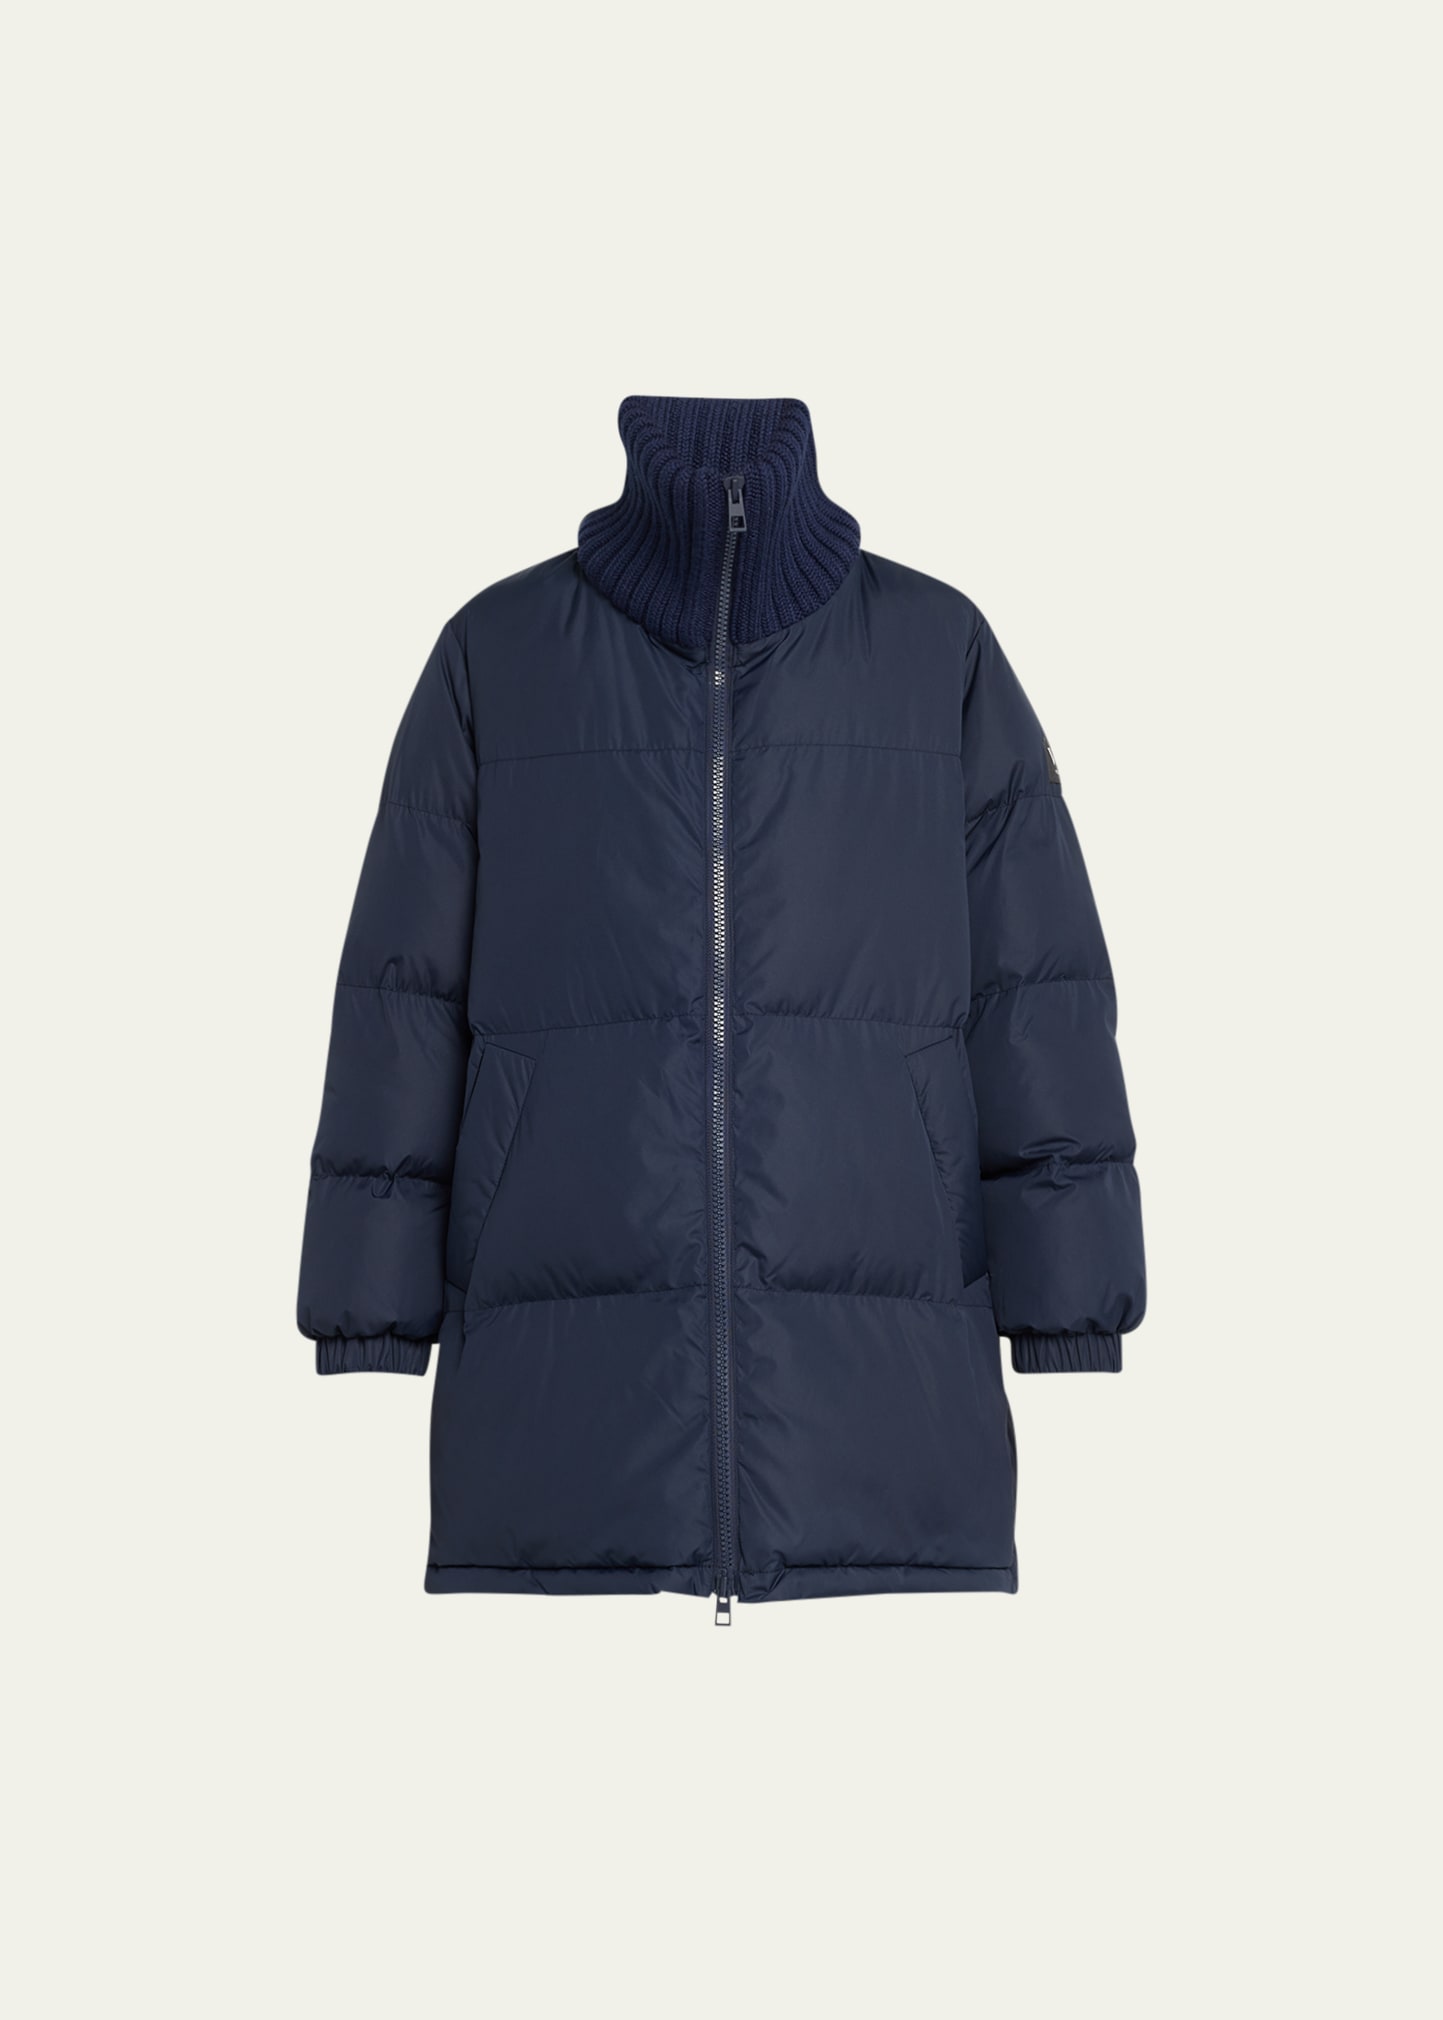 The Cloud Puffer Jacket